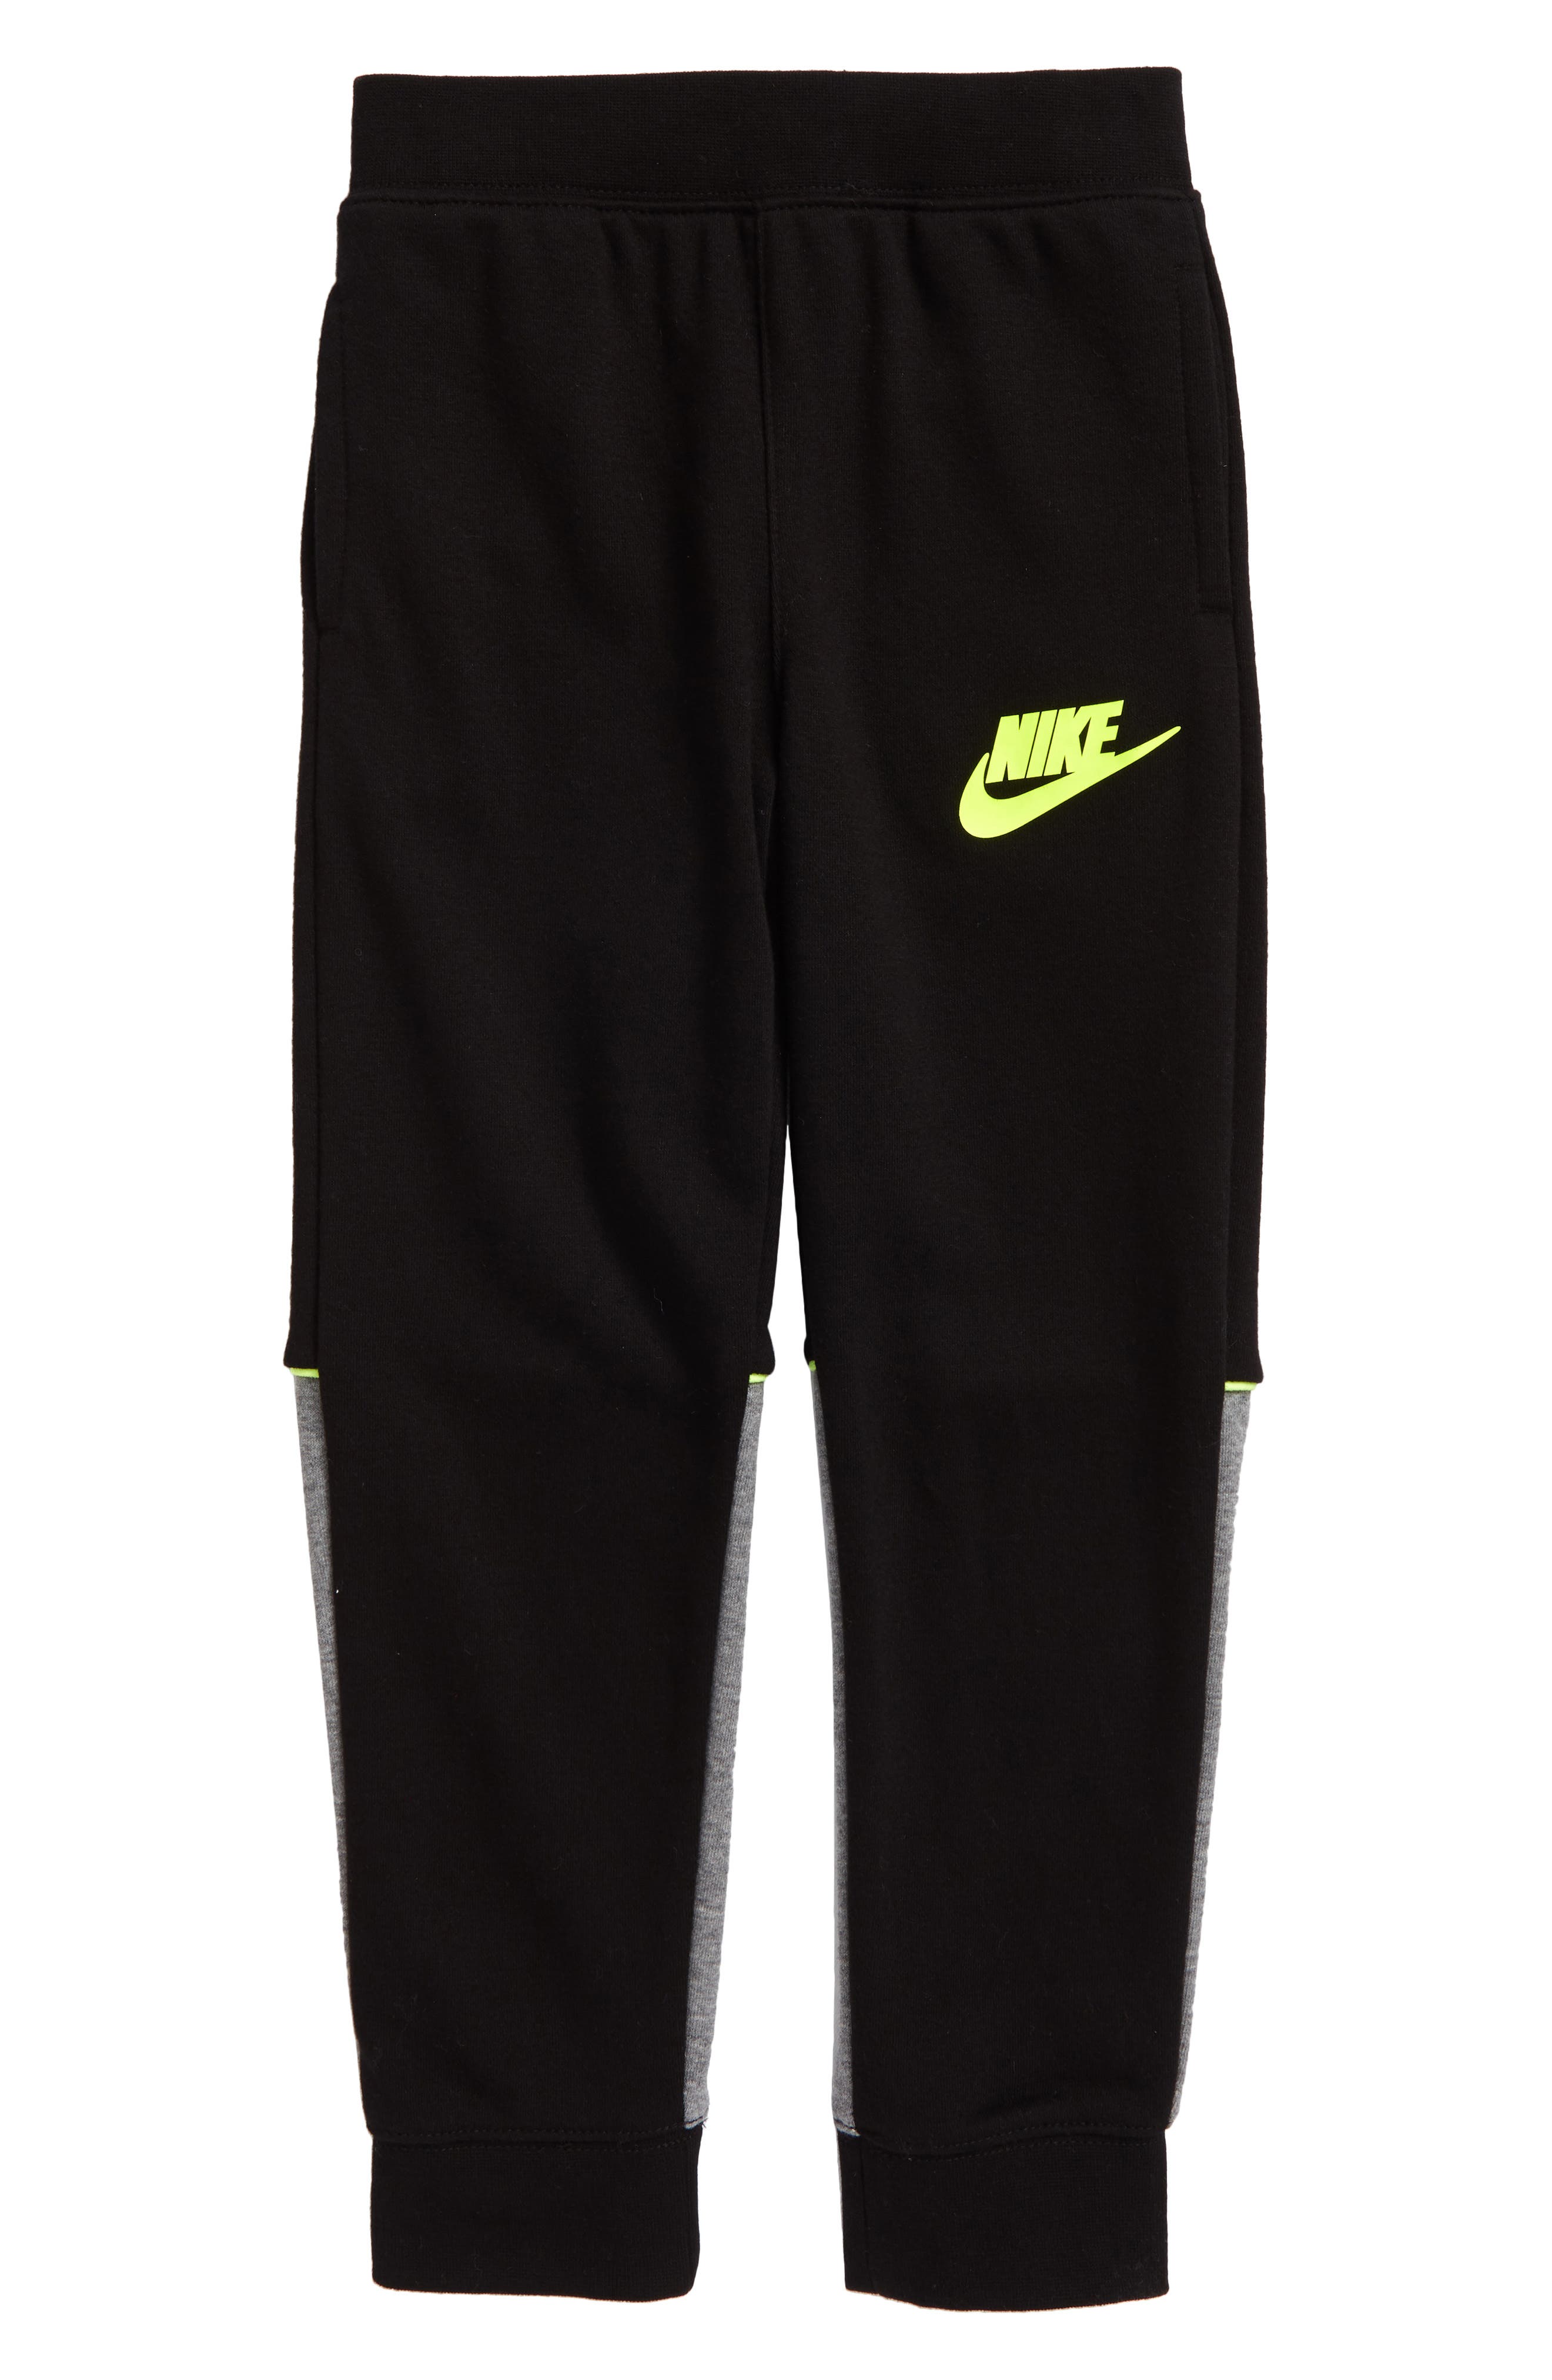 little kids nike clothes